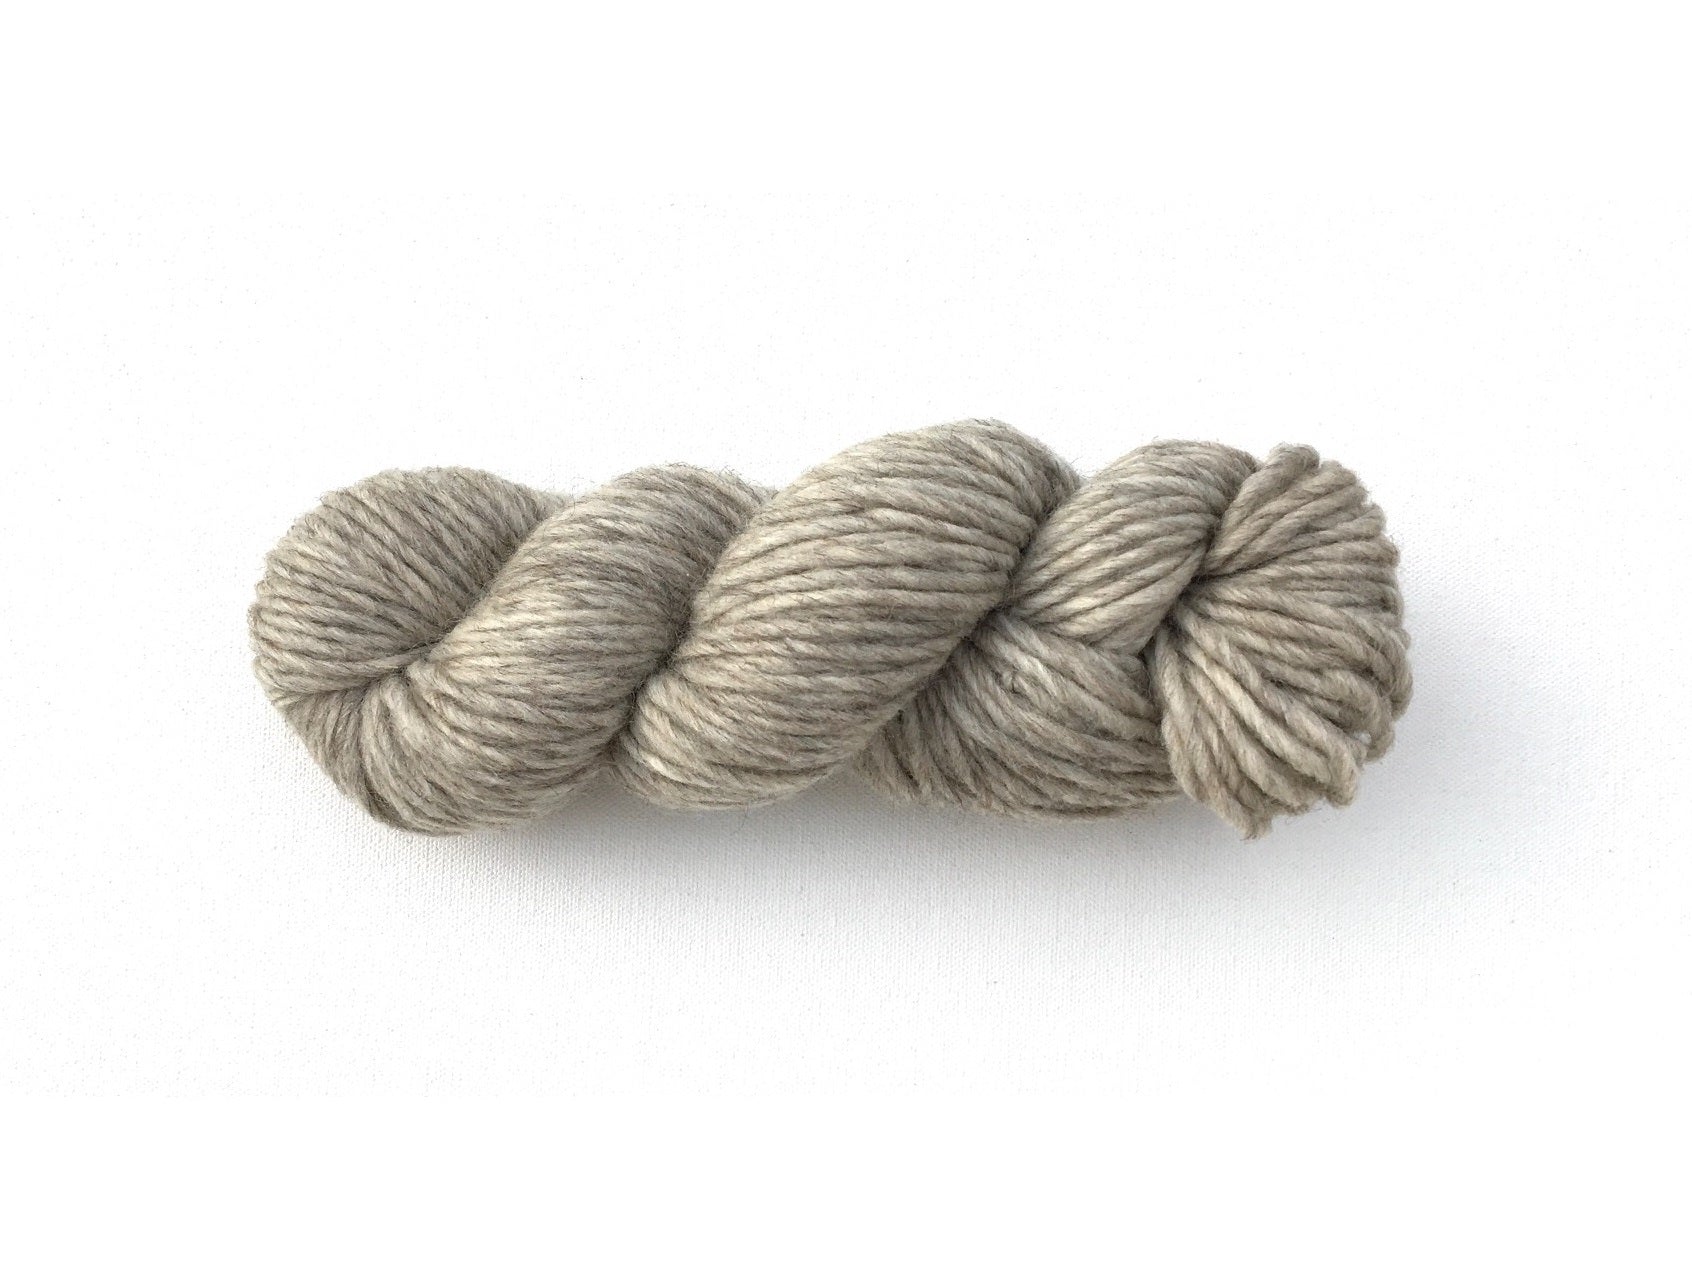 One hank of Roram Bulky yarn in natural light cool silvery grey